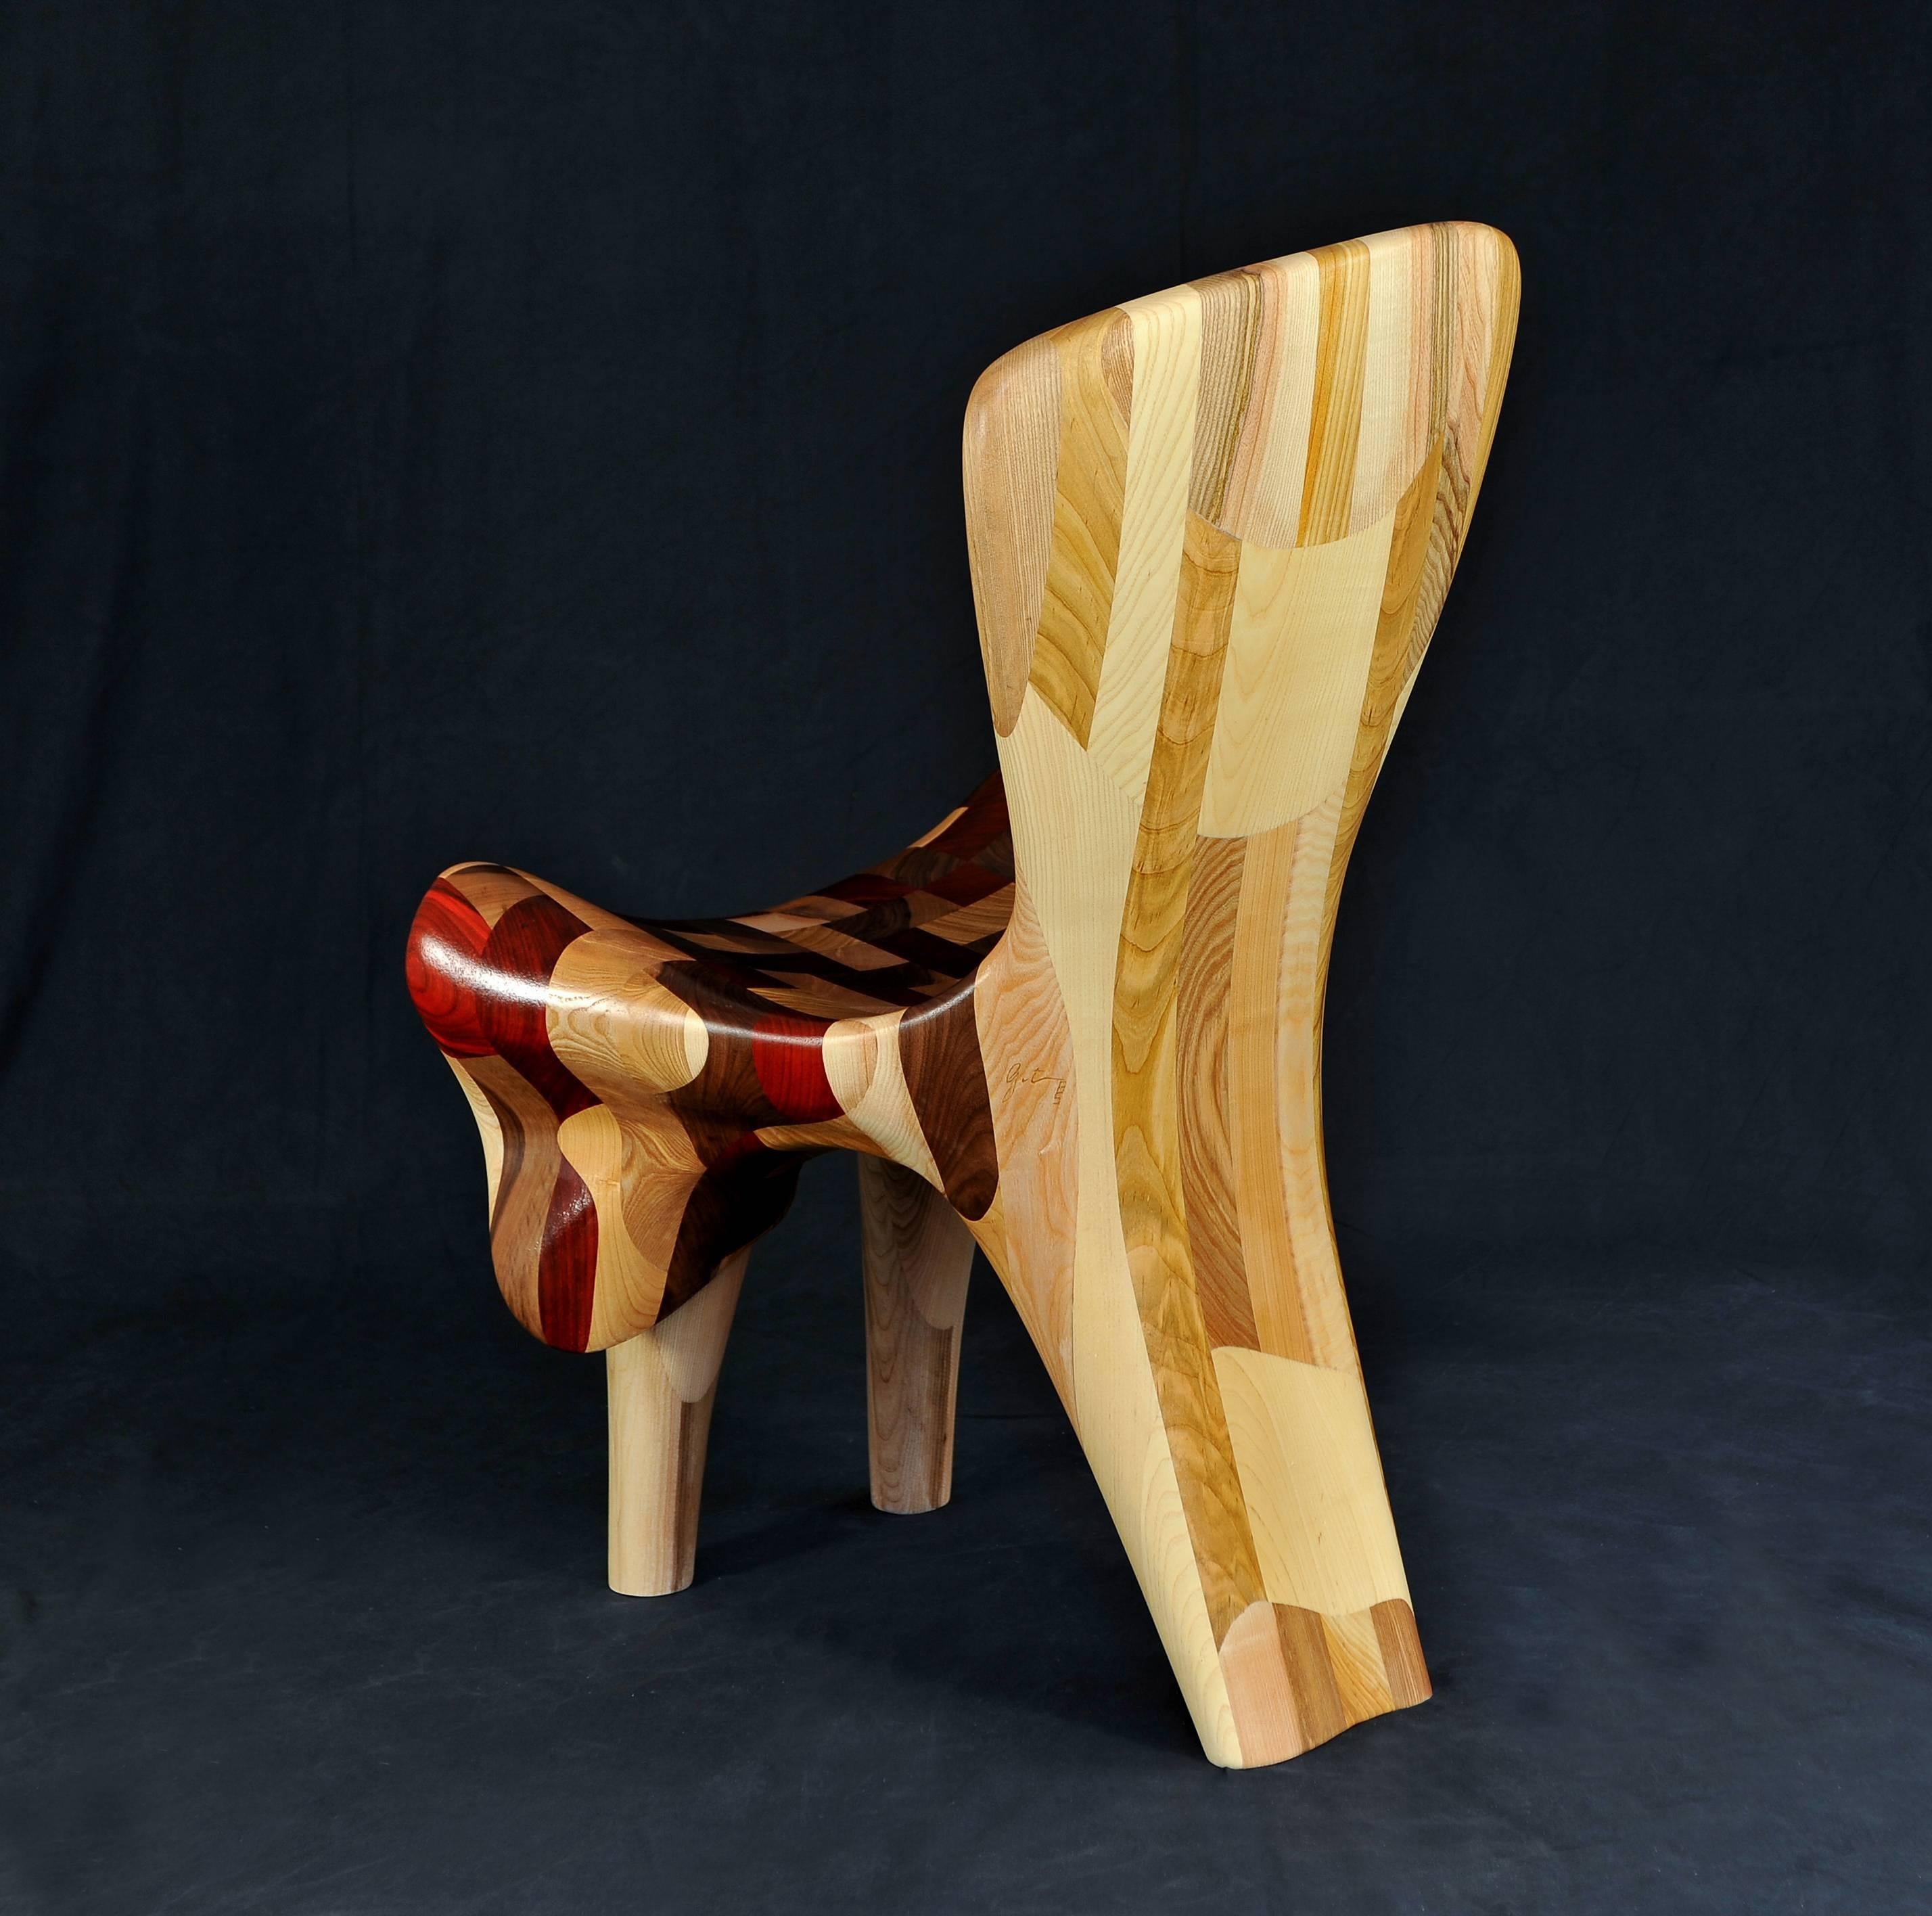 These wooden chairs – sculptures resemble delicate and elegant human figures, one is a “She” and the other a “He.” Gerenstein used sinuous curves and natural forms to establish spatial constructs and interactions that move beyond the humanly-defined